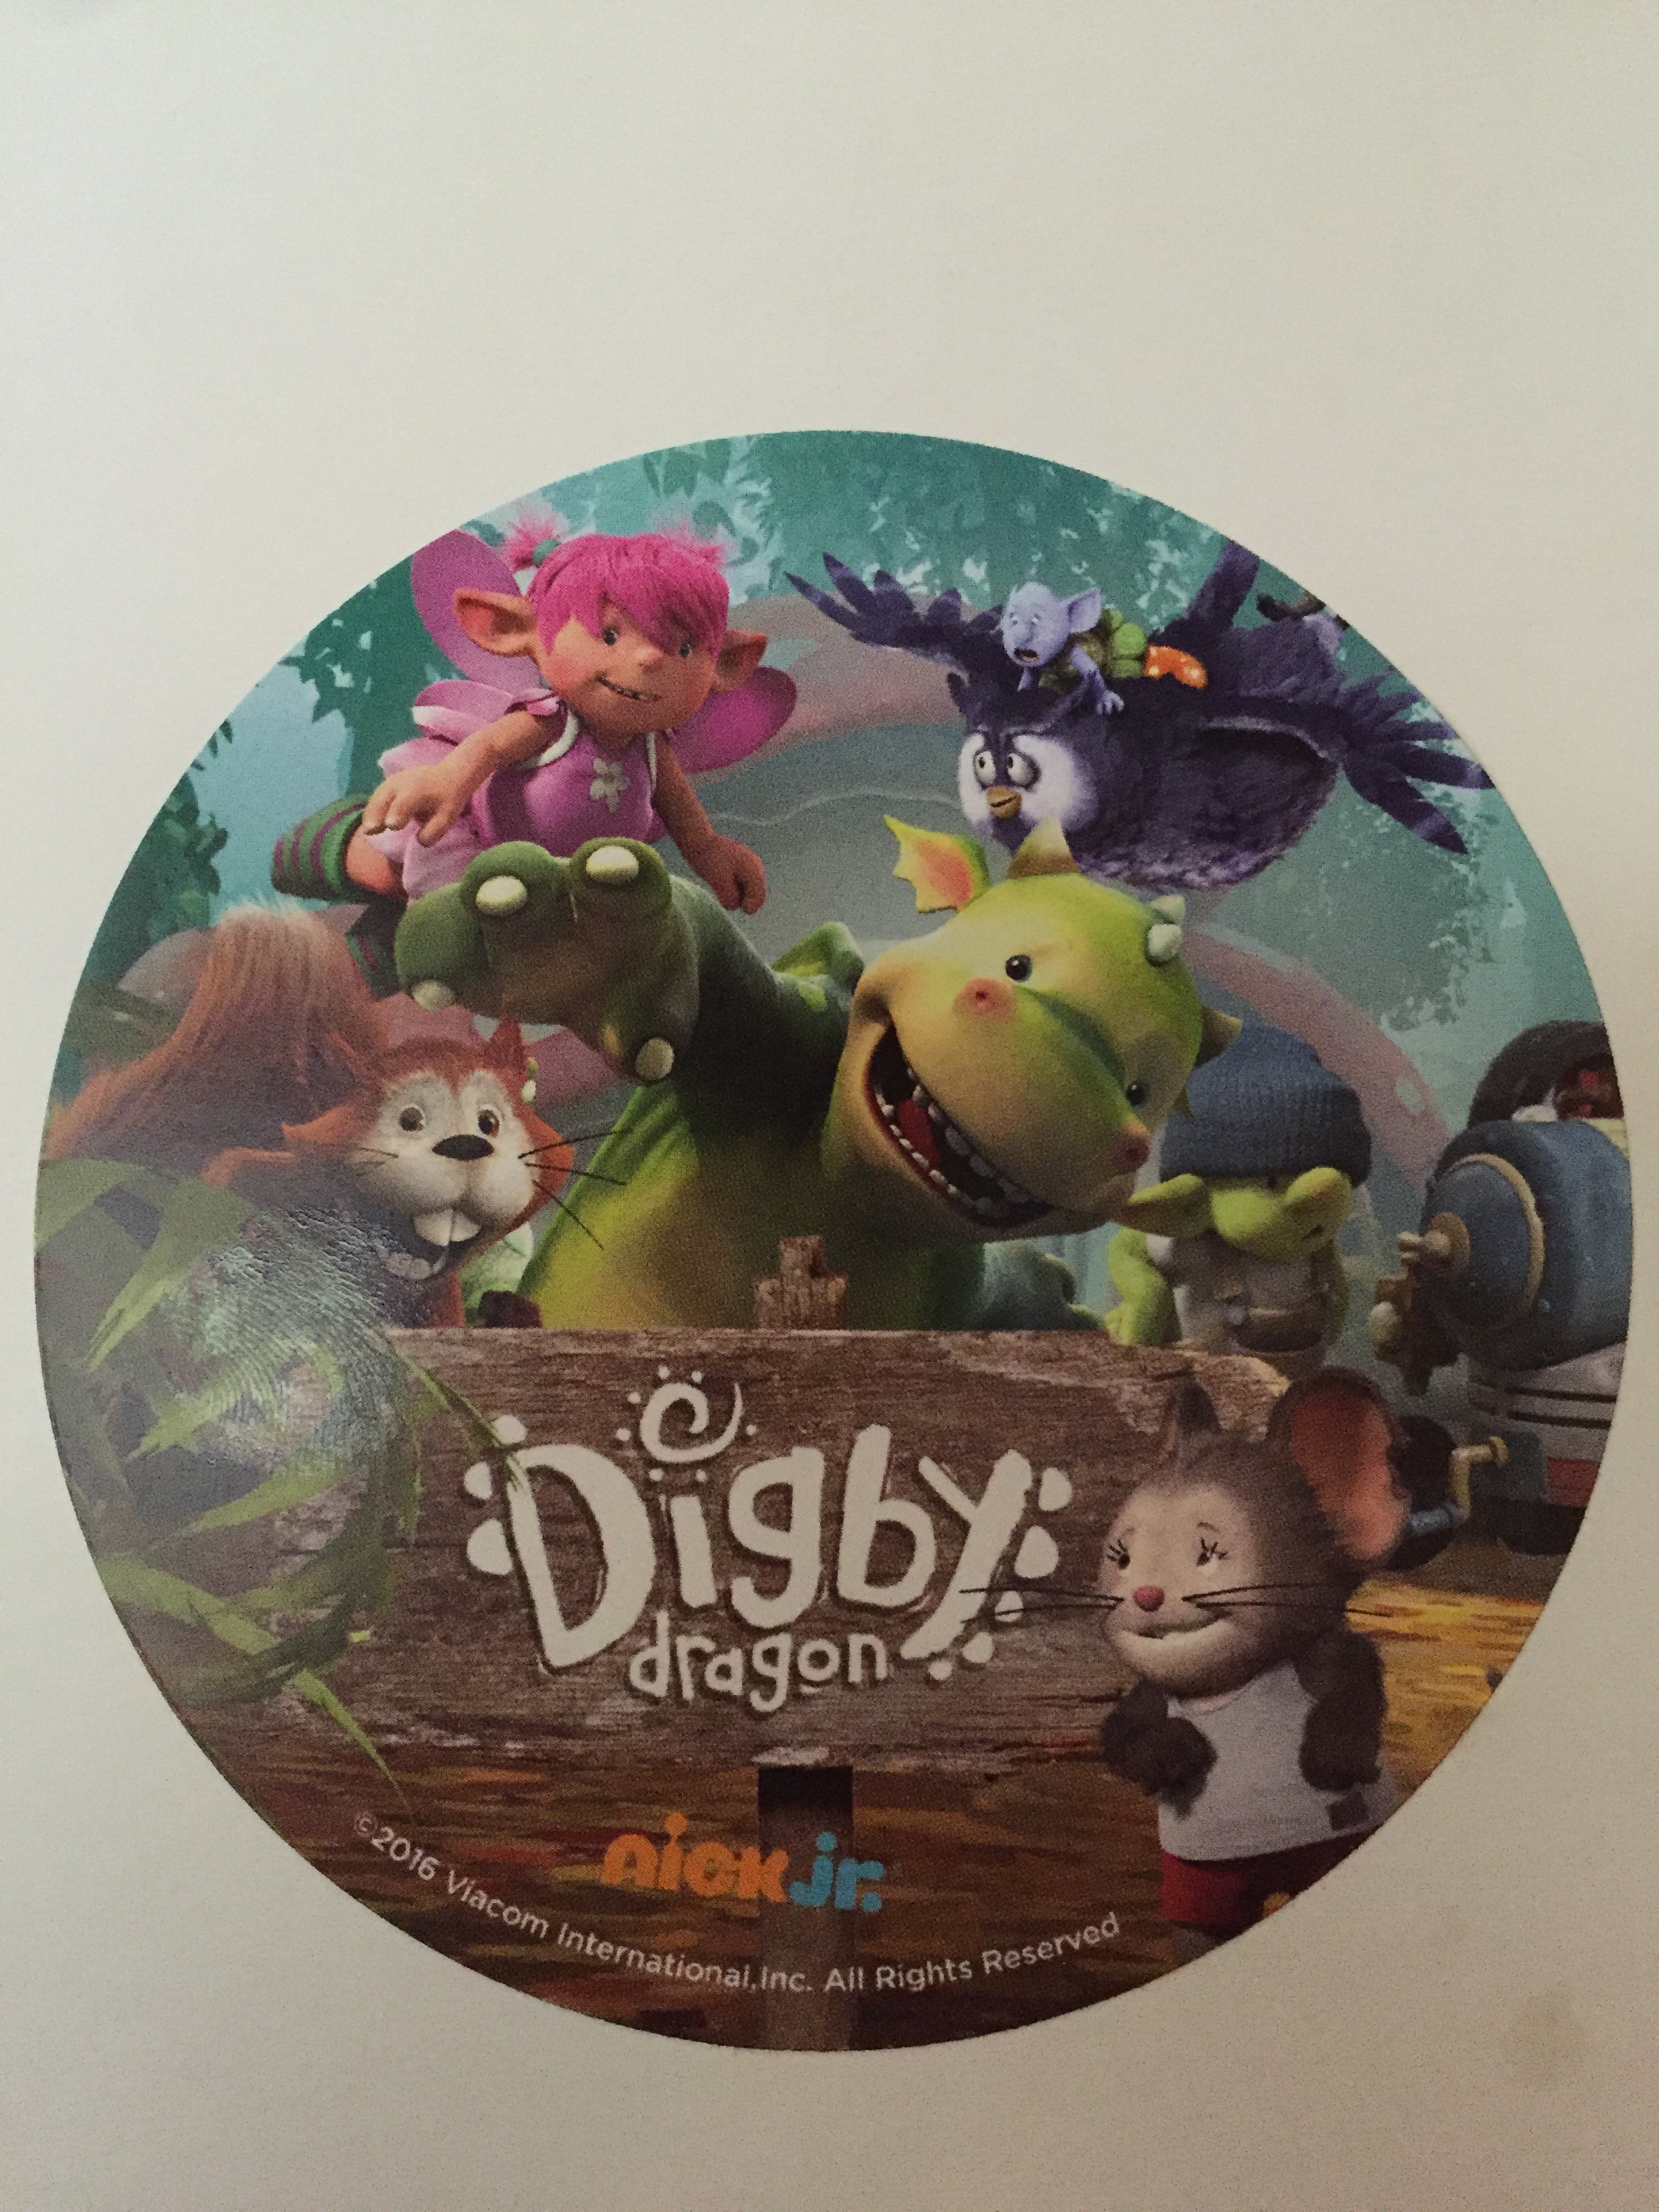 Premiere screening of Digby Dragon from Nick Jr